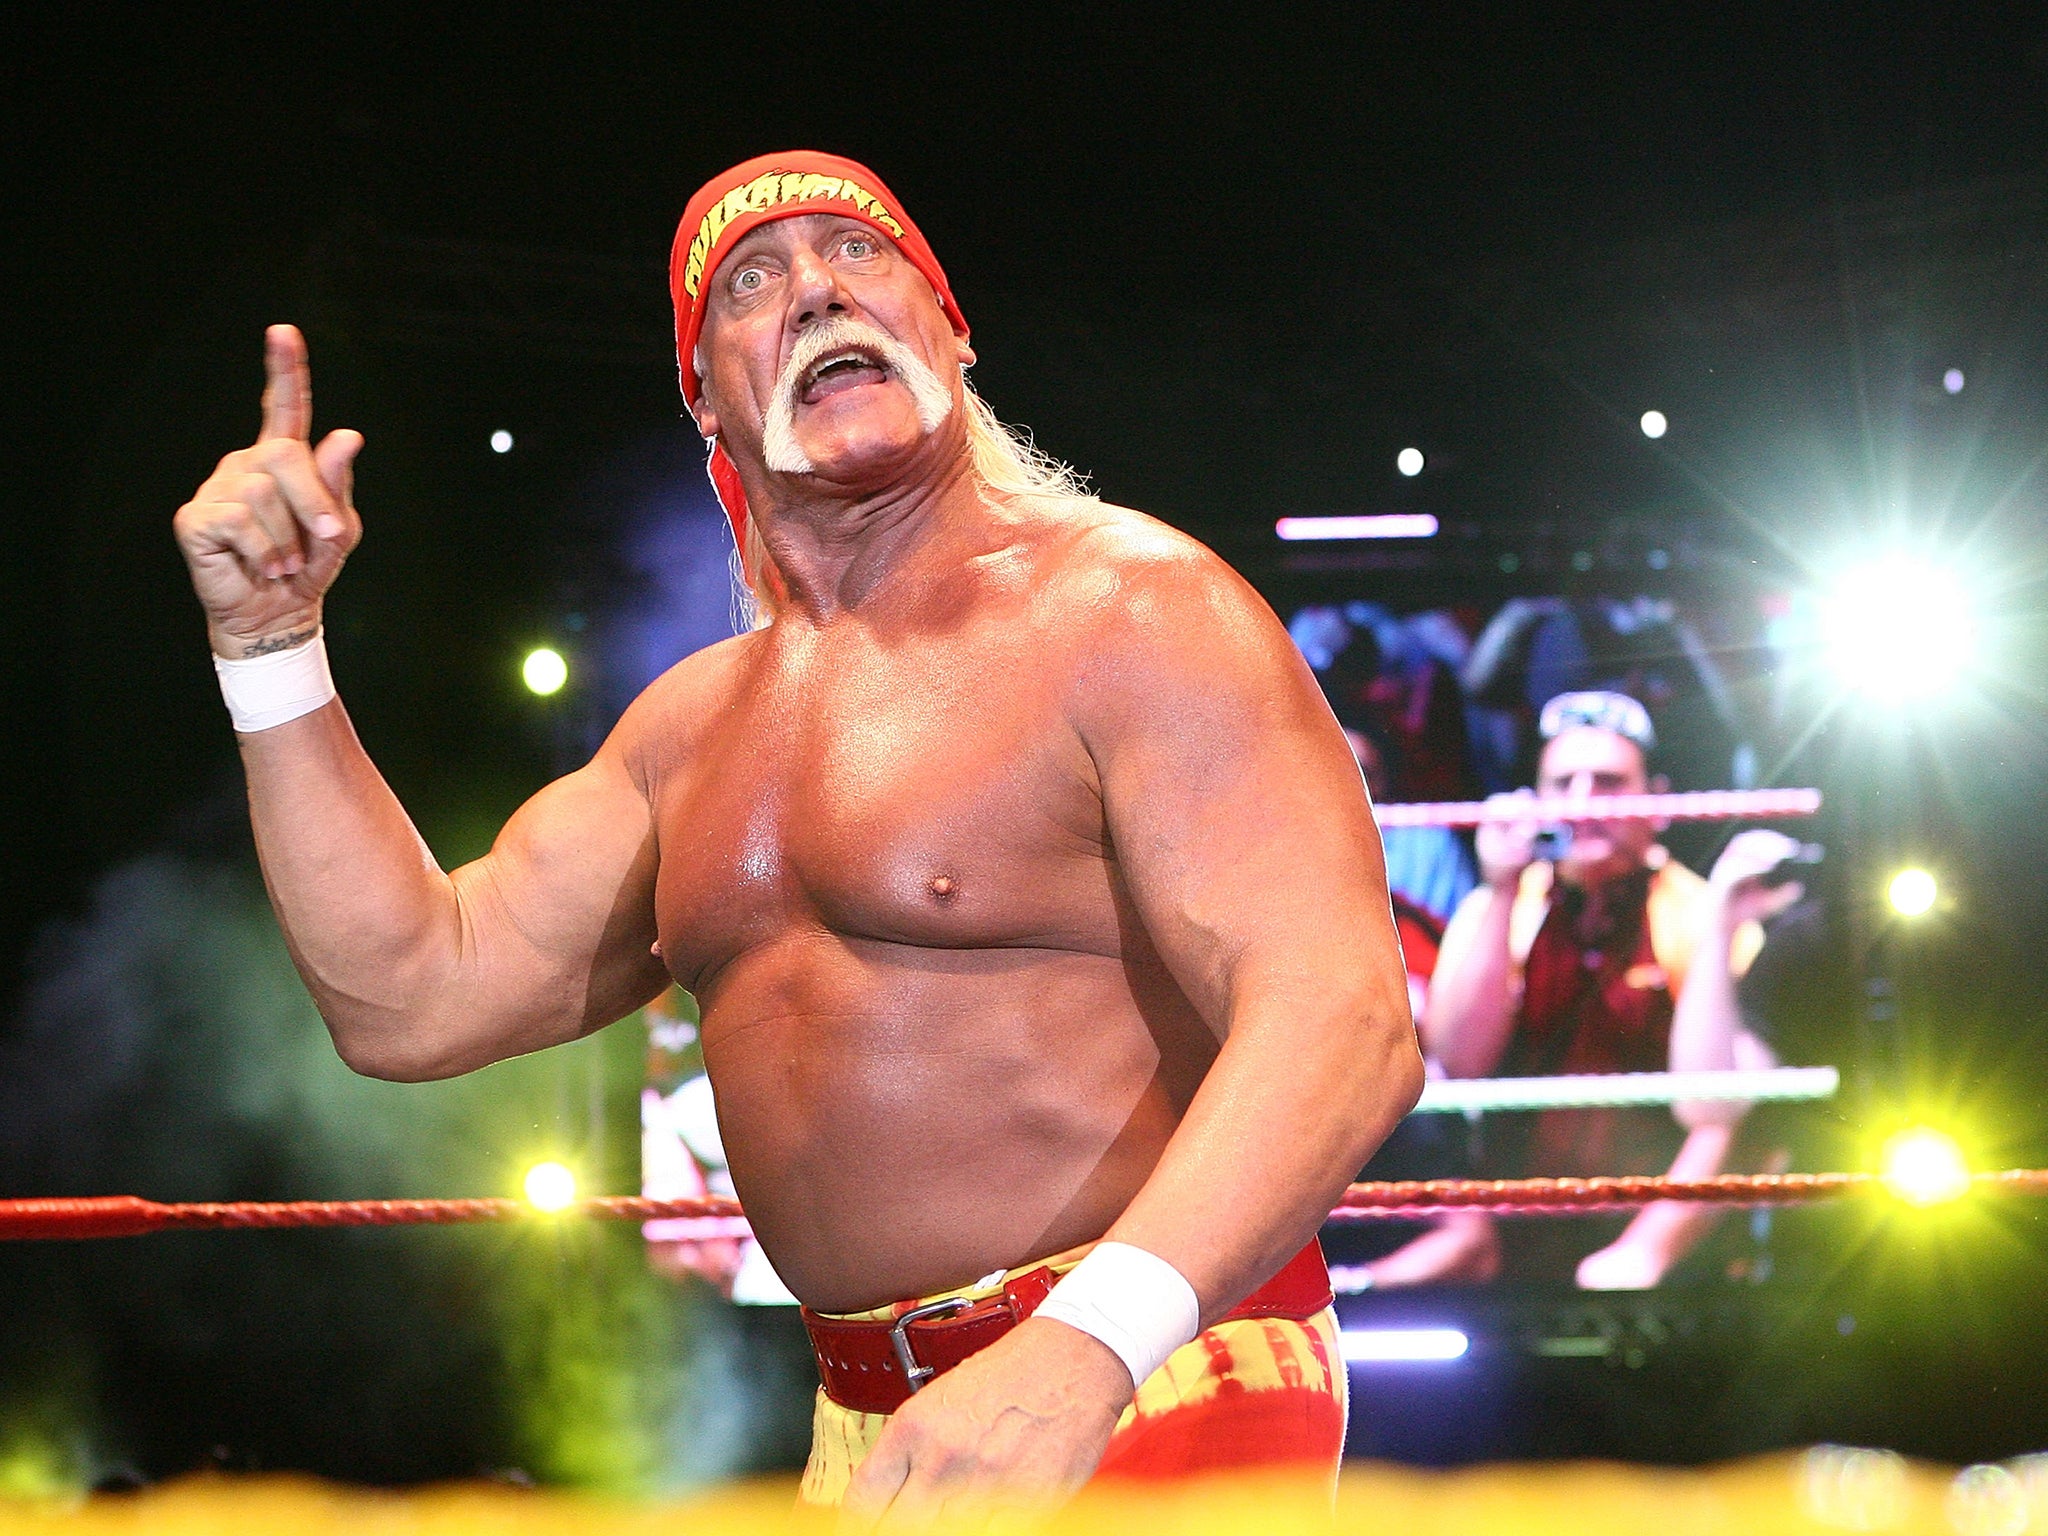 Hulk Hogan will not be linking up with the Premier League after all